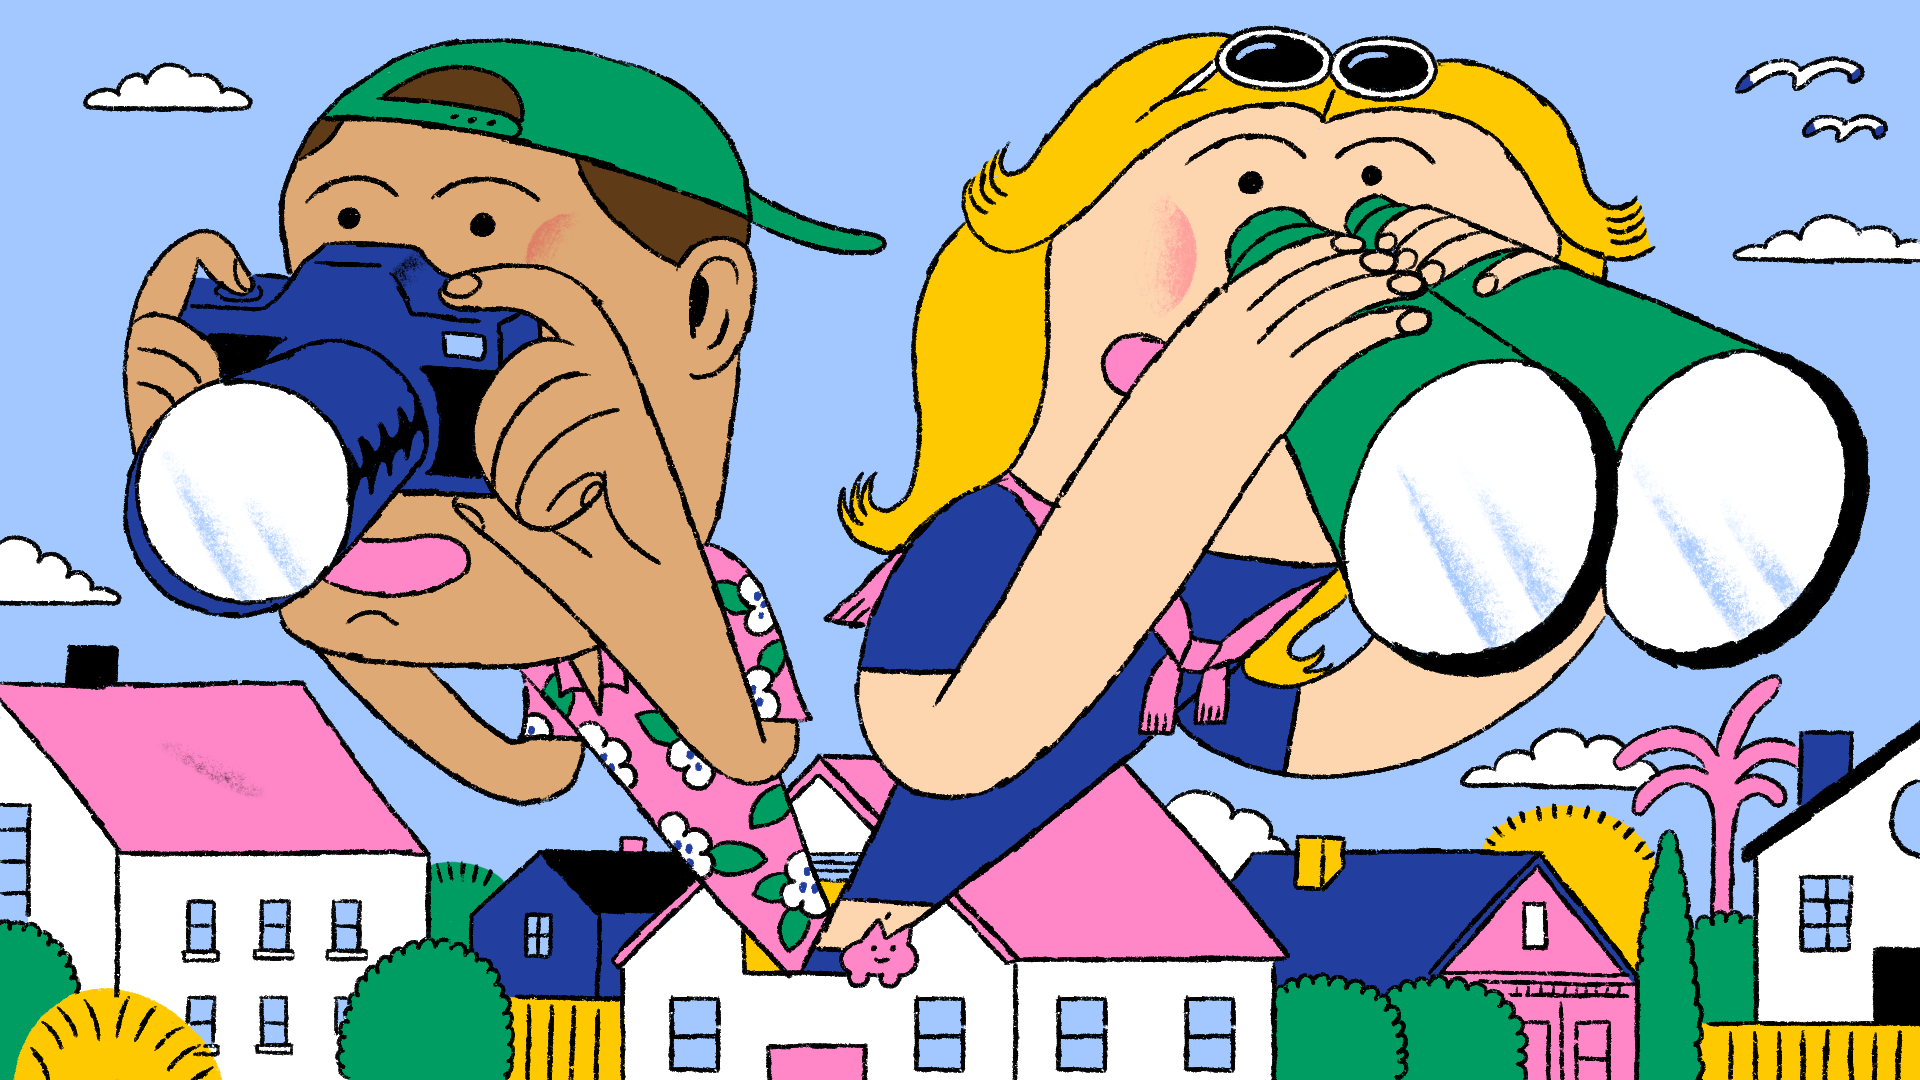 An illustration of two young people — a man in a backward baseball cap and a camera and a woman with binoculars — peering out of the window of a house. The people are cartoonish and large. The house sits among other suburban homes with trees and fences.